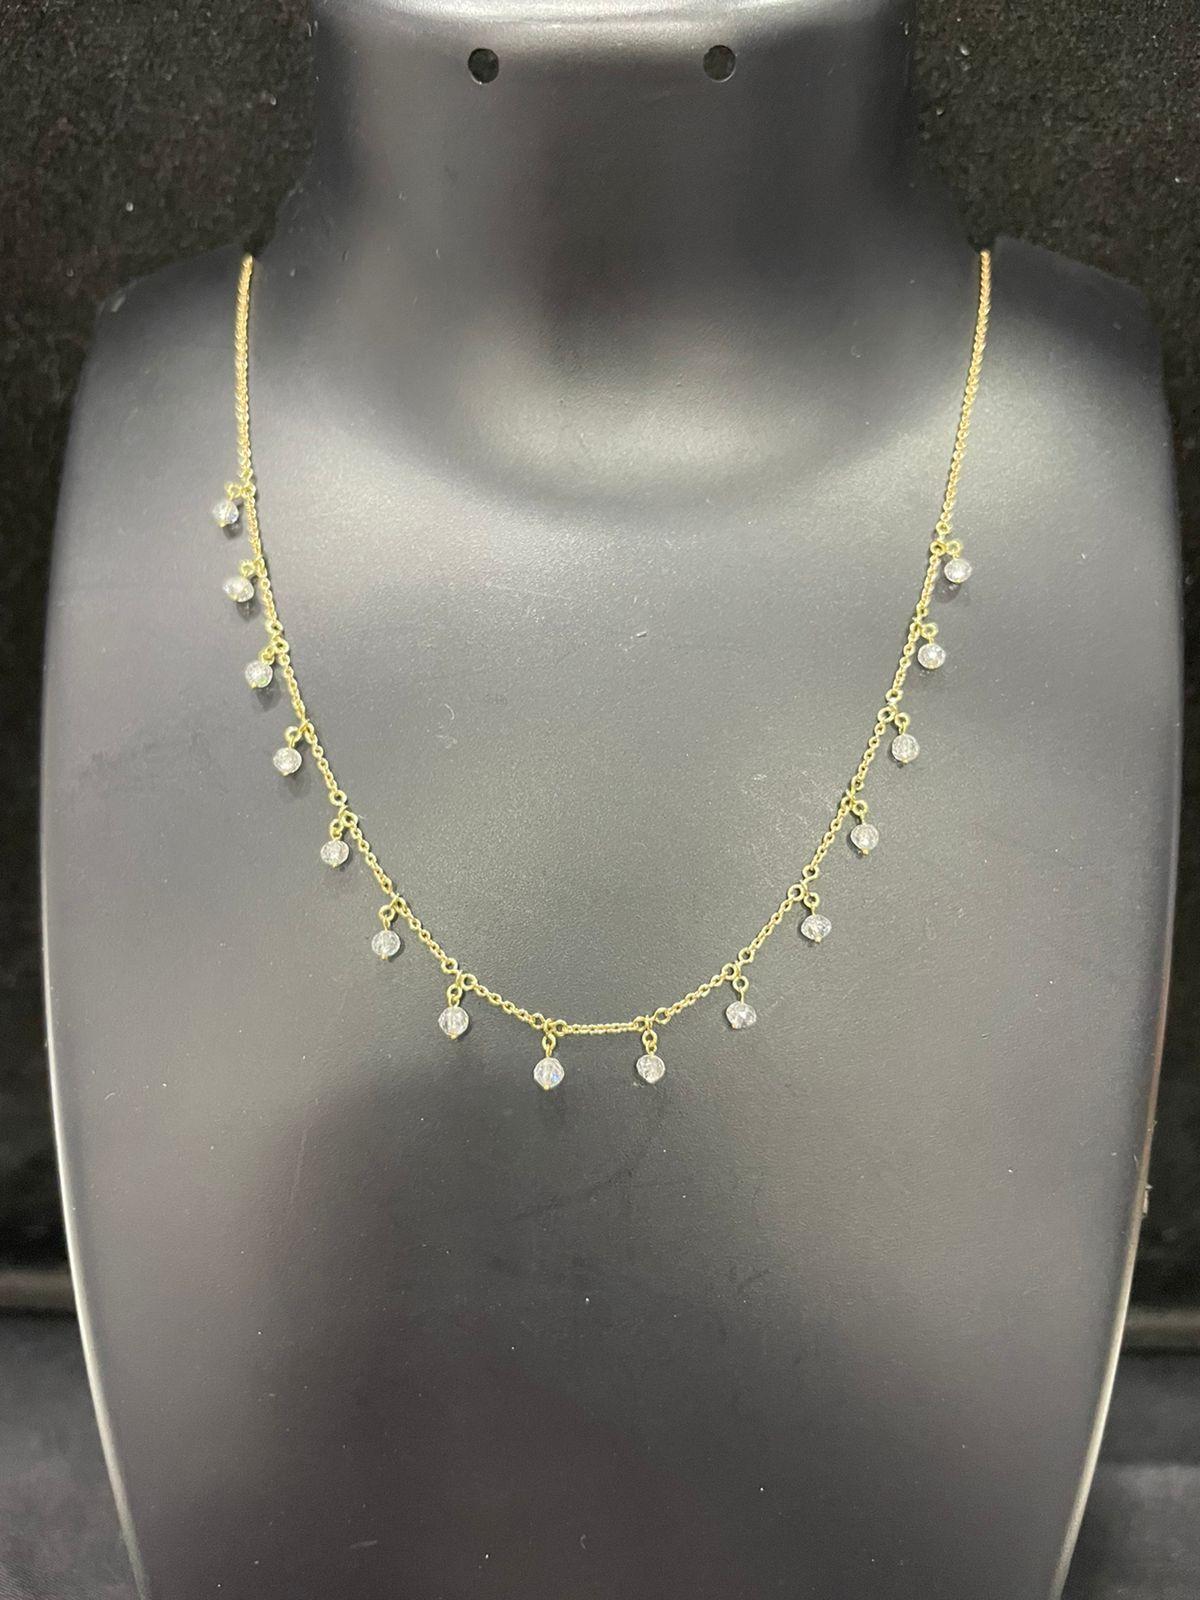 Panim White Beads Diamond Necklace in 18 Karat White Gold

In this necklace Beads diamonds are evenly spaced on a white gold chain. This is a piece that can be worn everyday, alone or layered with other necklaces.

18K White Gold
